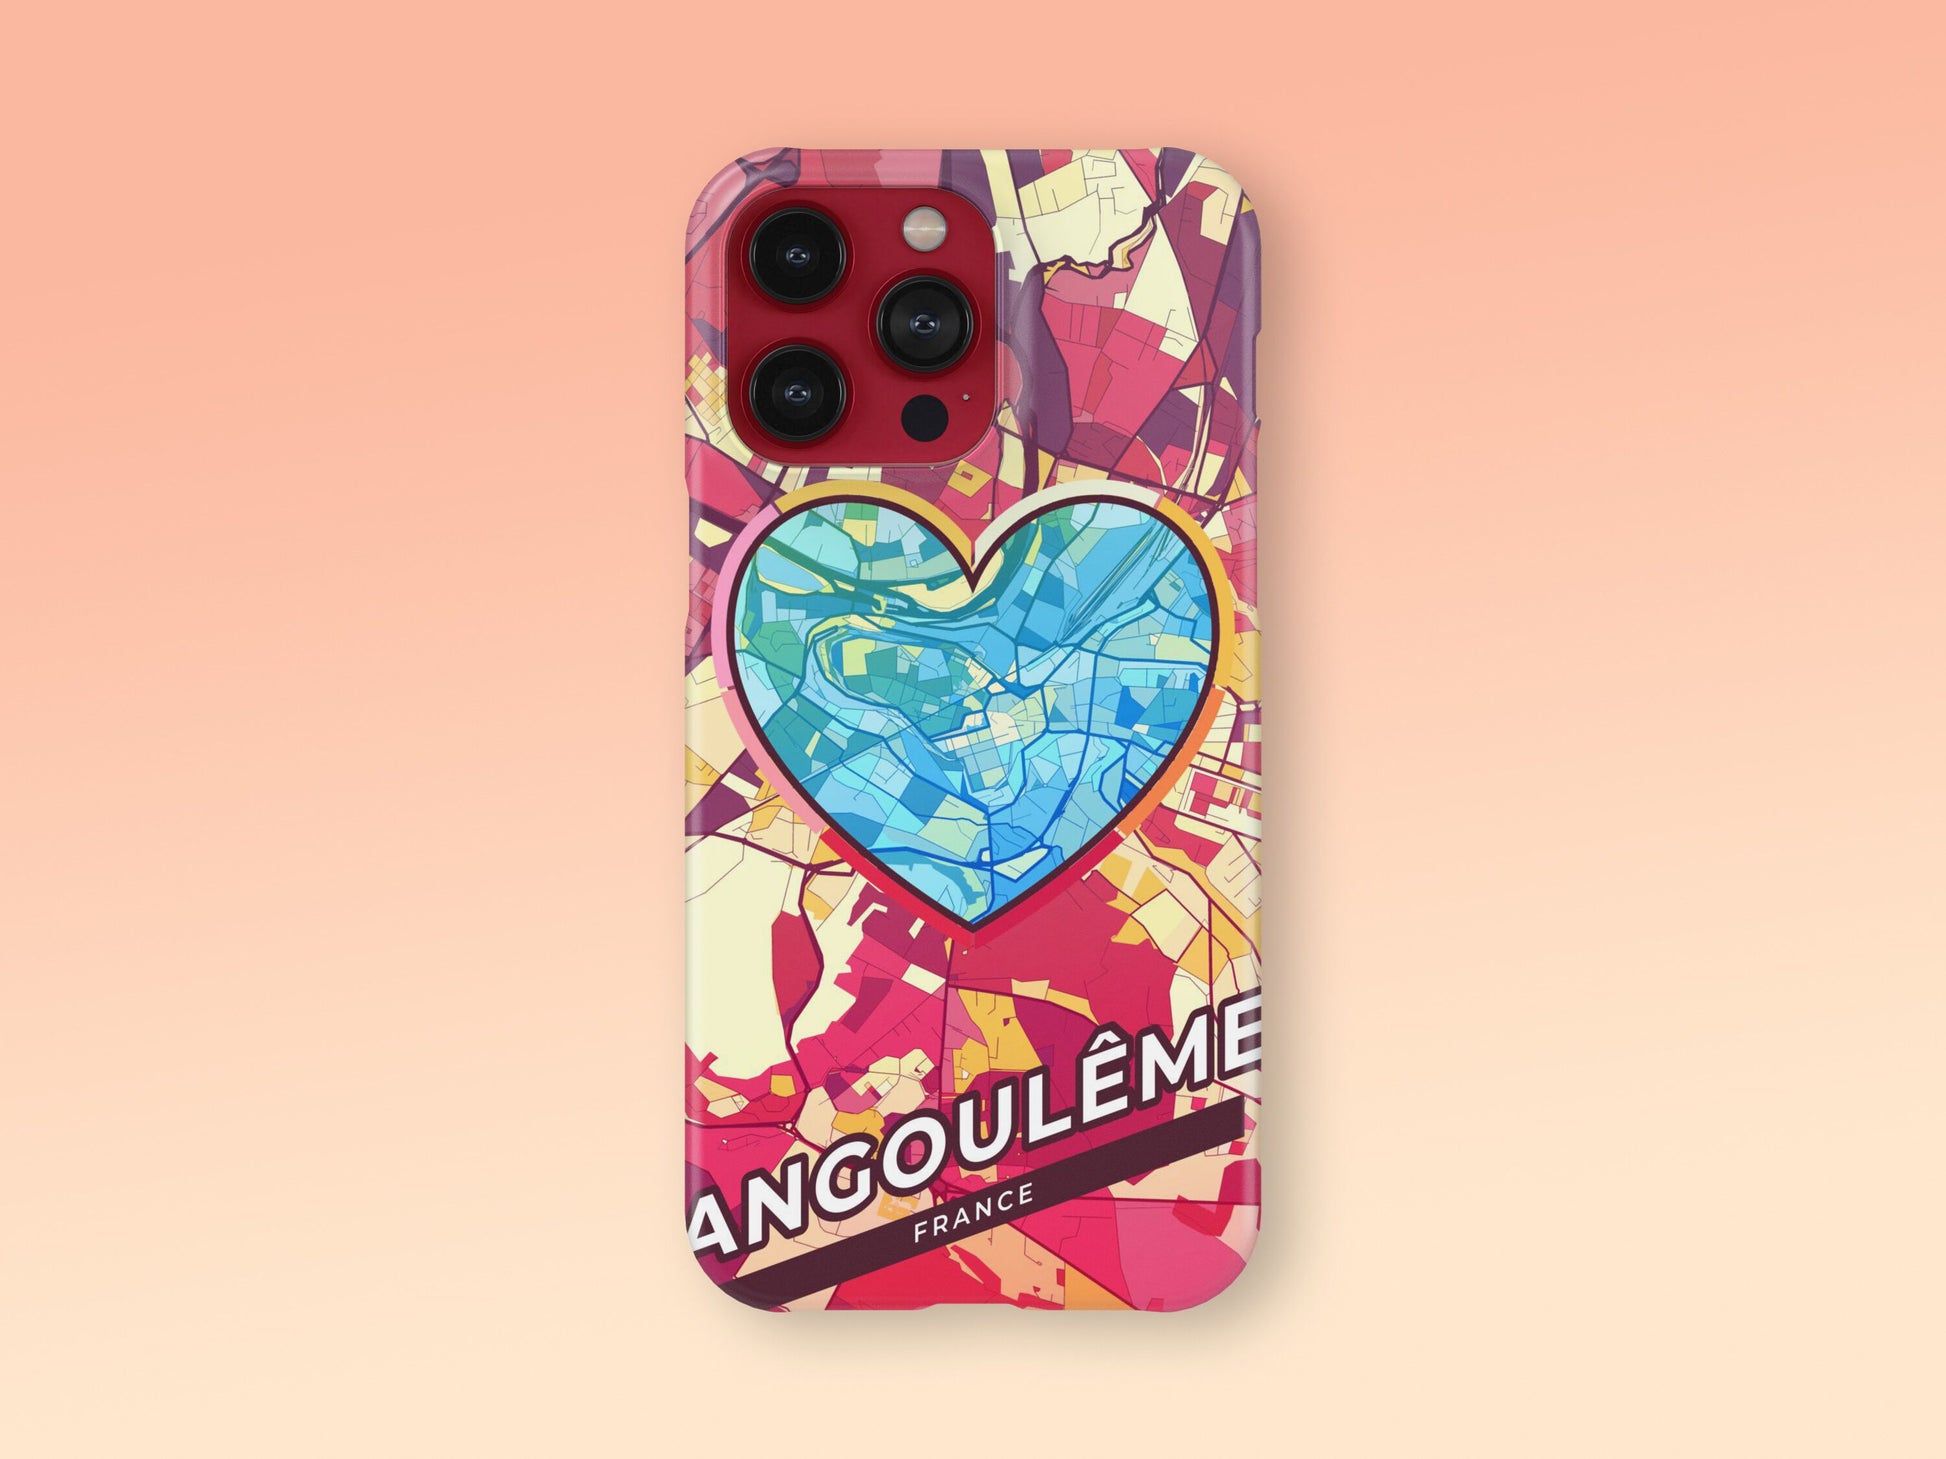 Angoulême France slim phone case with colorful icon. Birthday, wedding or housewarming gift. Couple match cases. 2